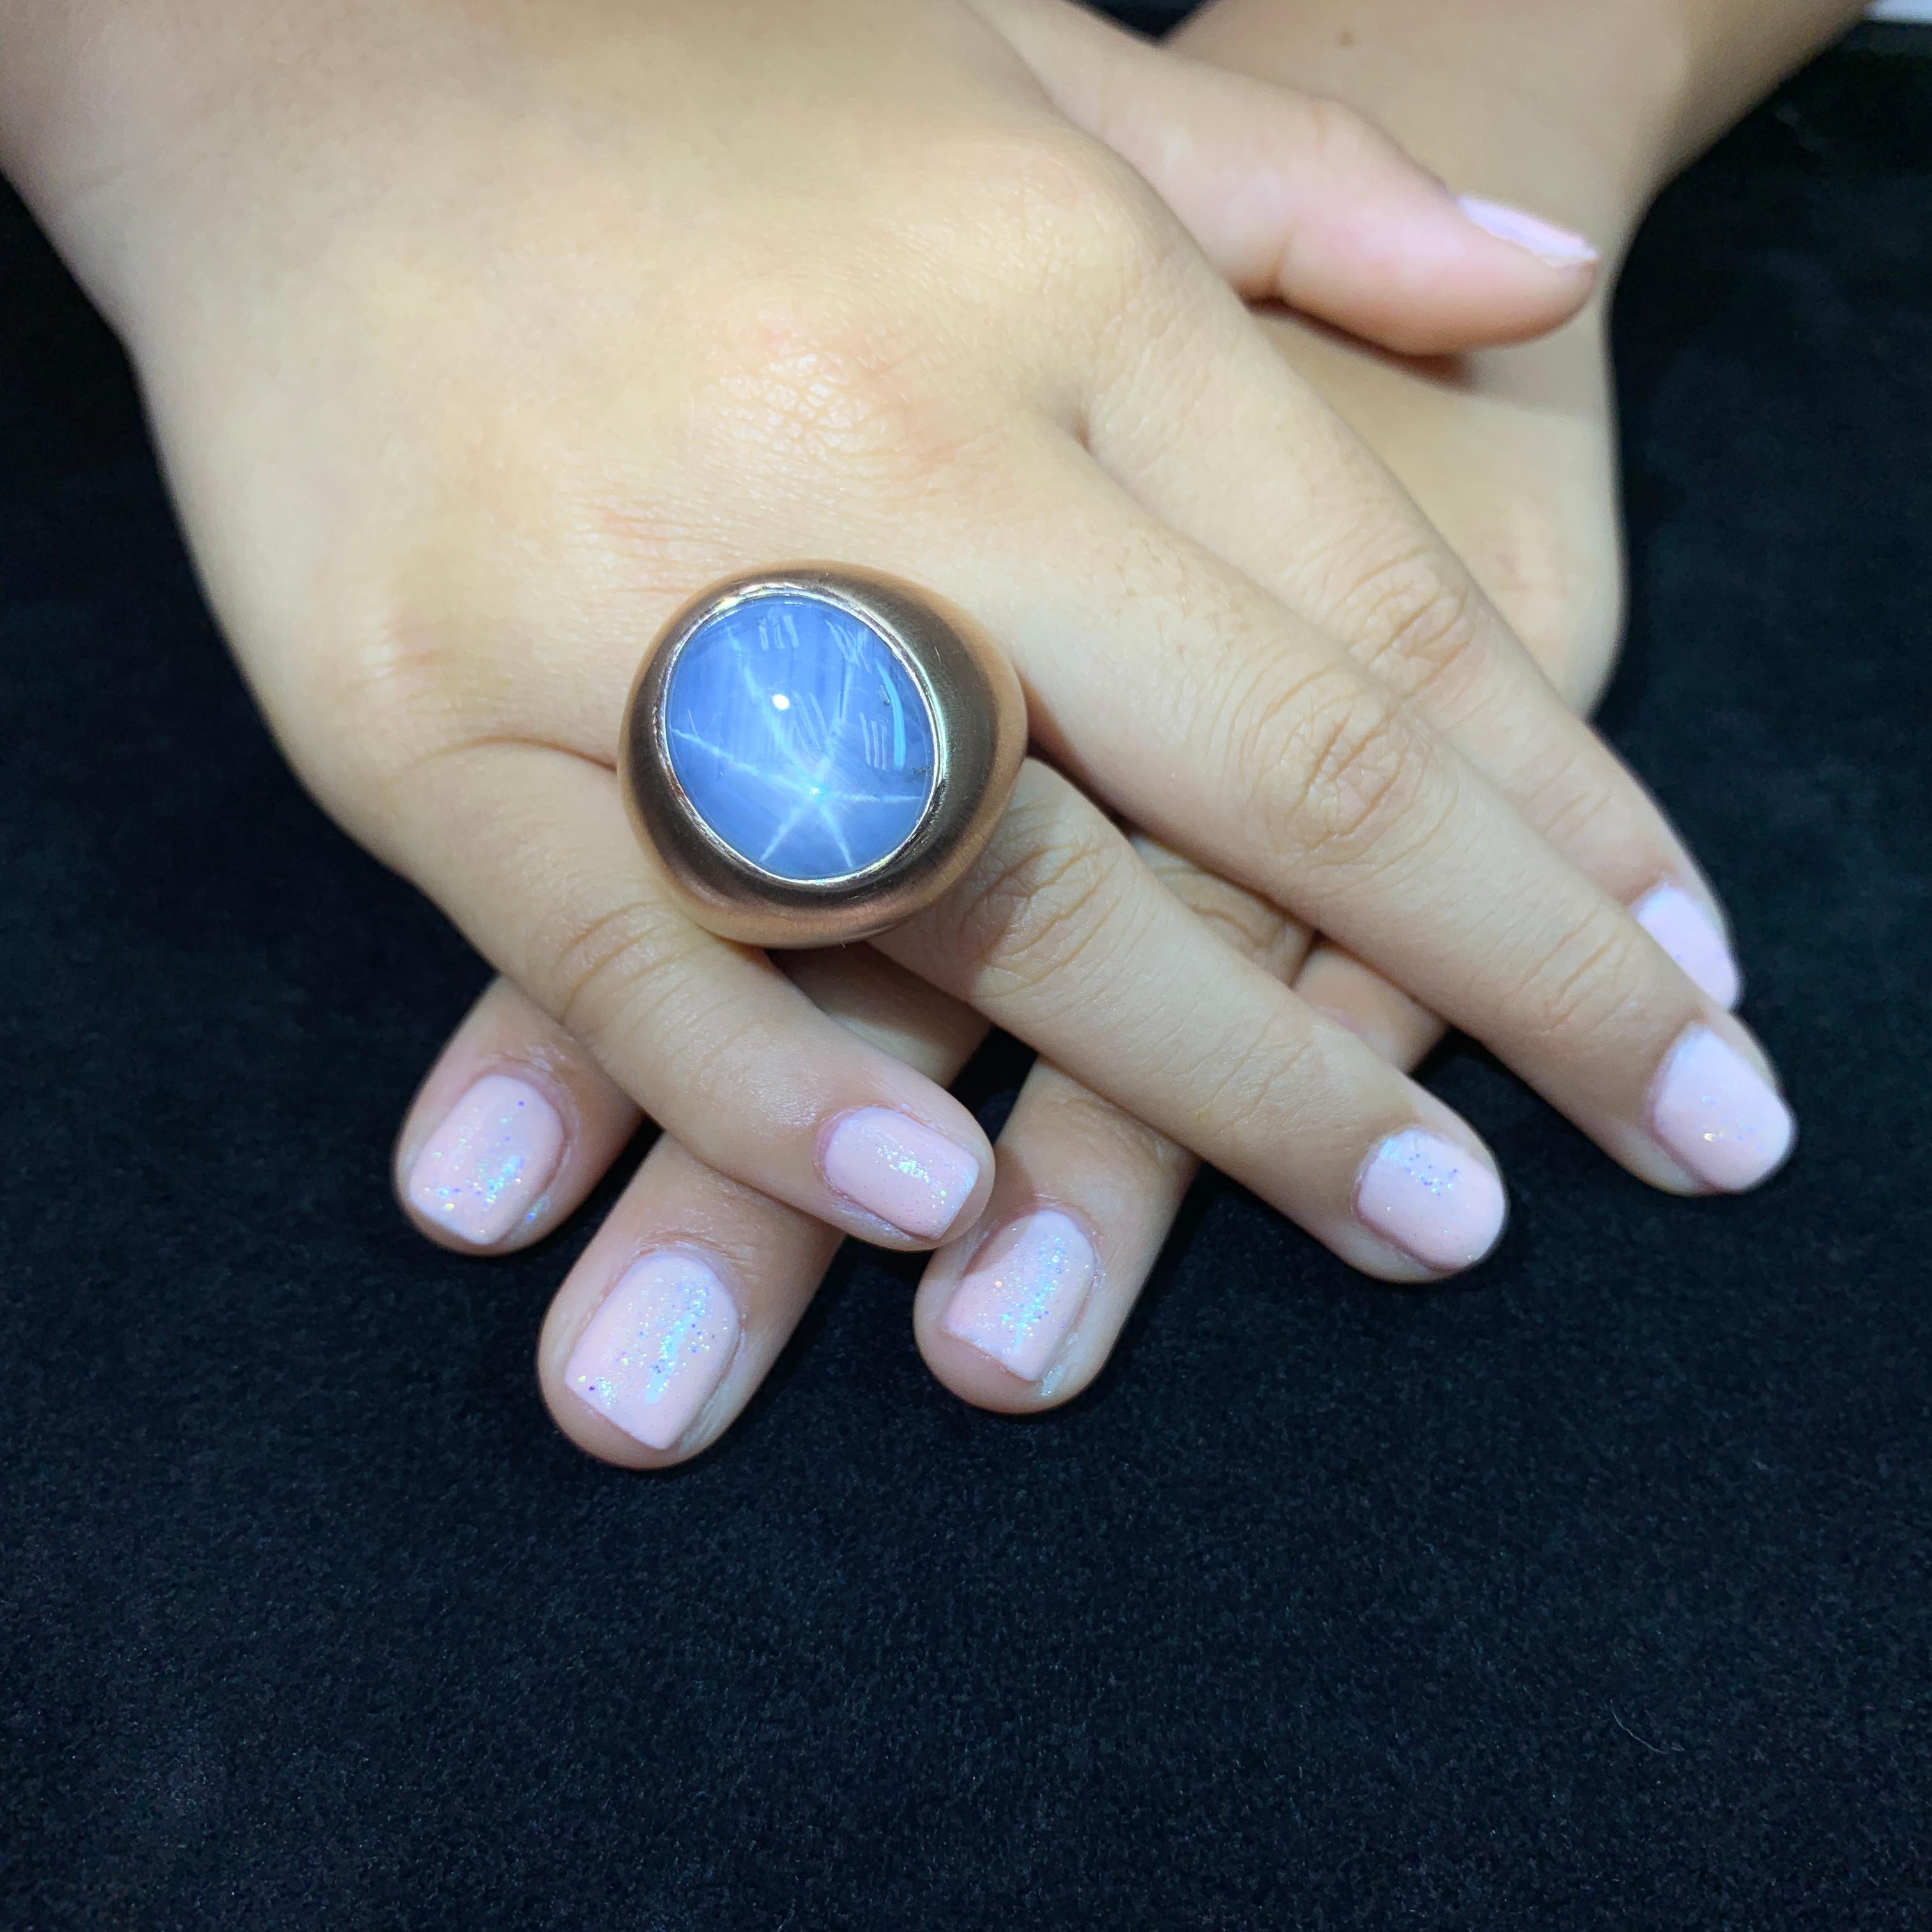 Here is a certified natural light blue star Sapphire rose gold ring. The ring is set in 18k rose gold. The ring is simple but makes a big statement! The almost 40 Cts star sapphire is impressive. The star is centered and very strong especially in